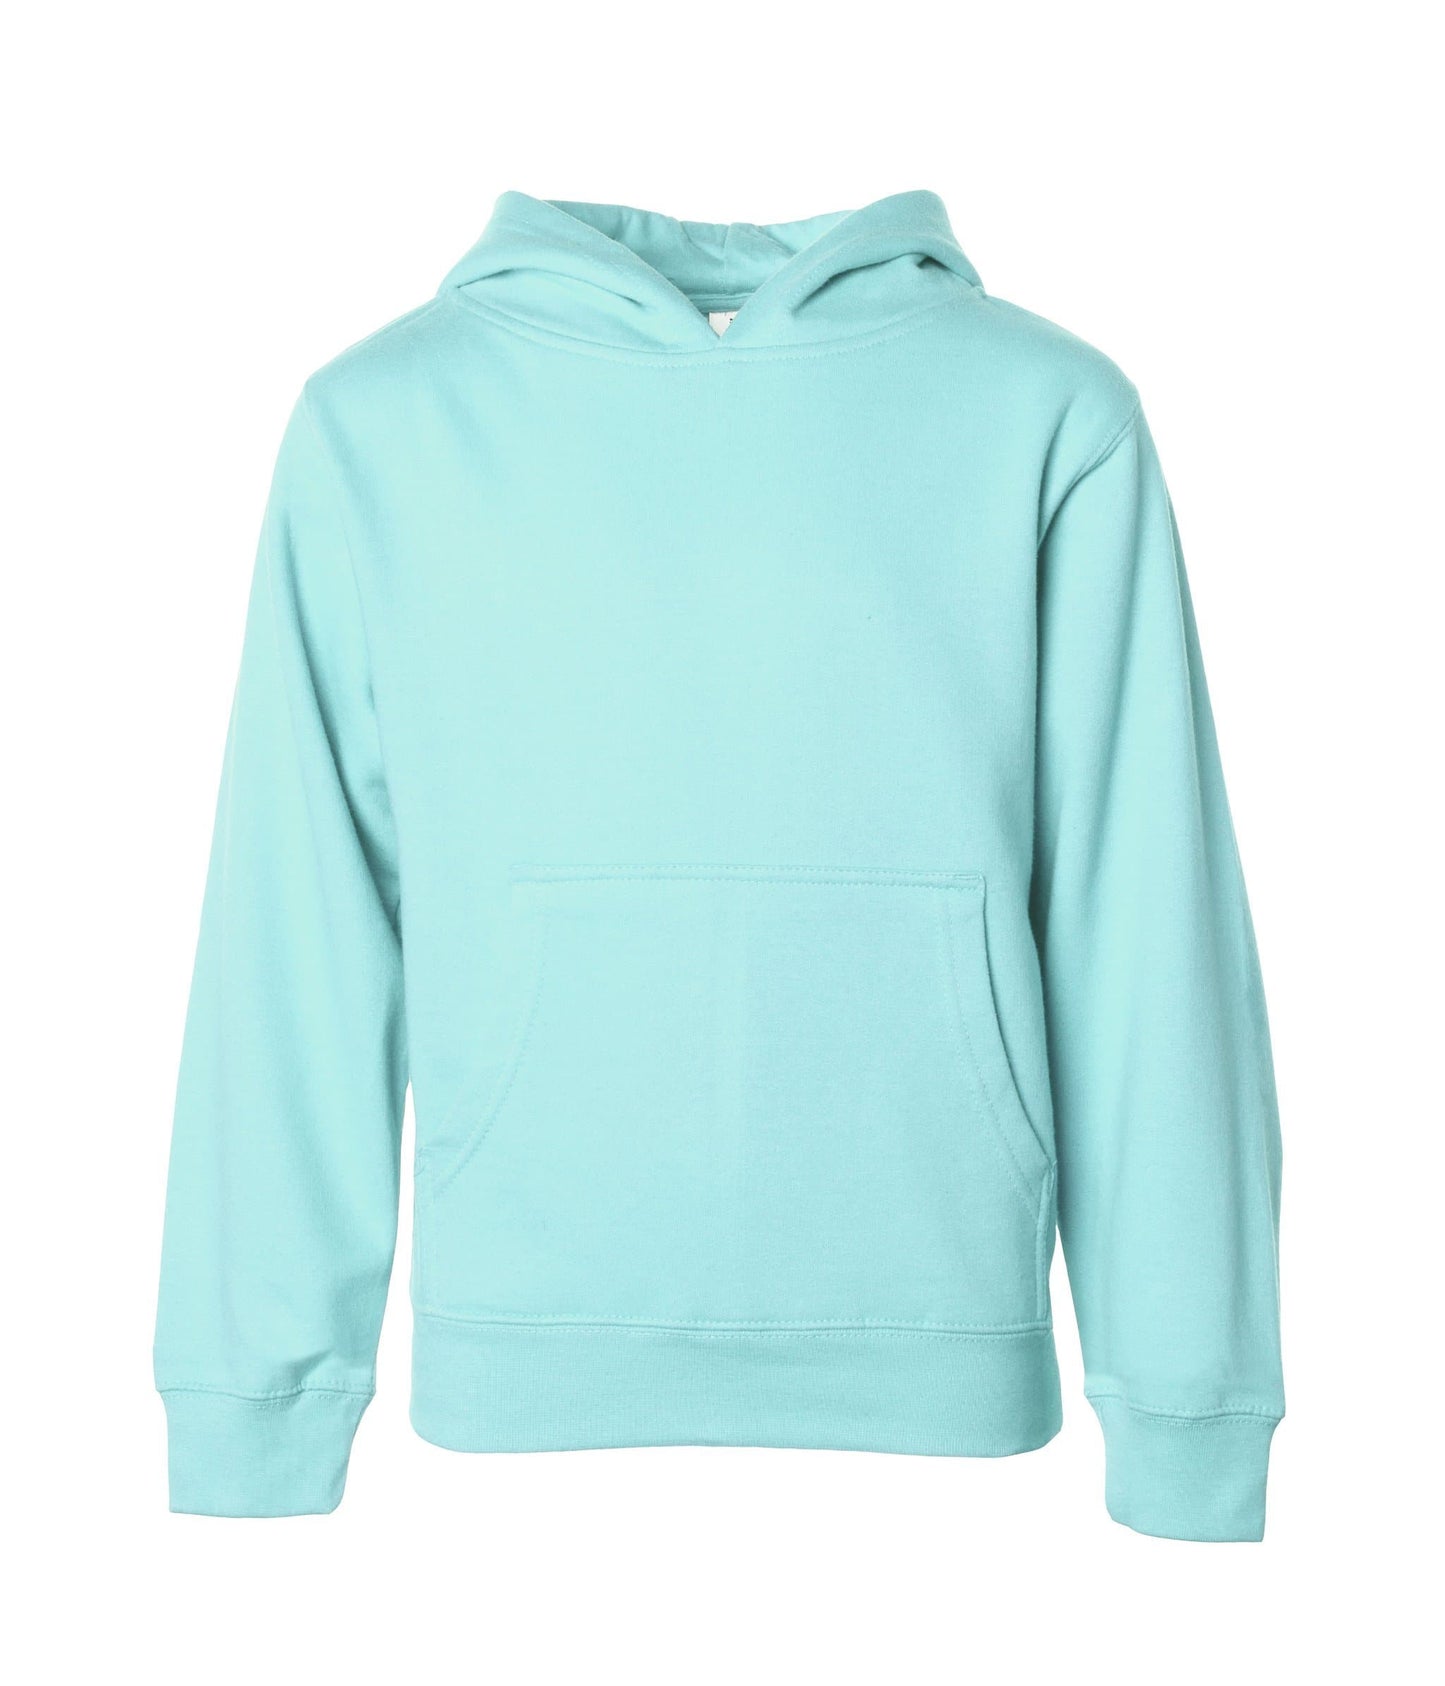 SS4001Y Youth Midweight Pullover Hooded Sweatshirt - Mint